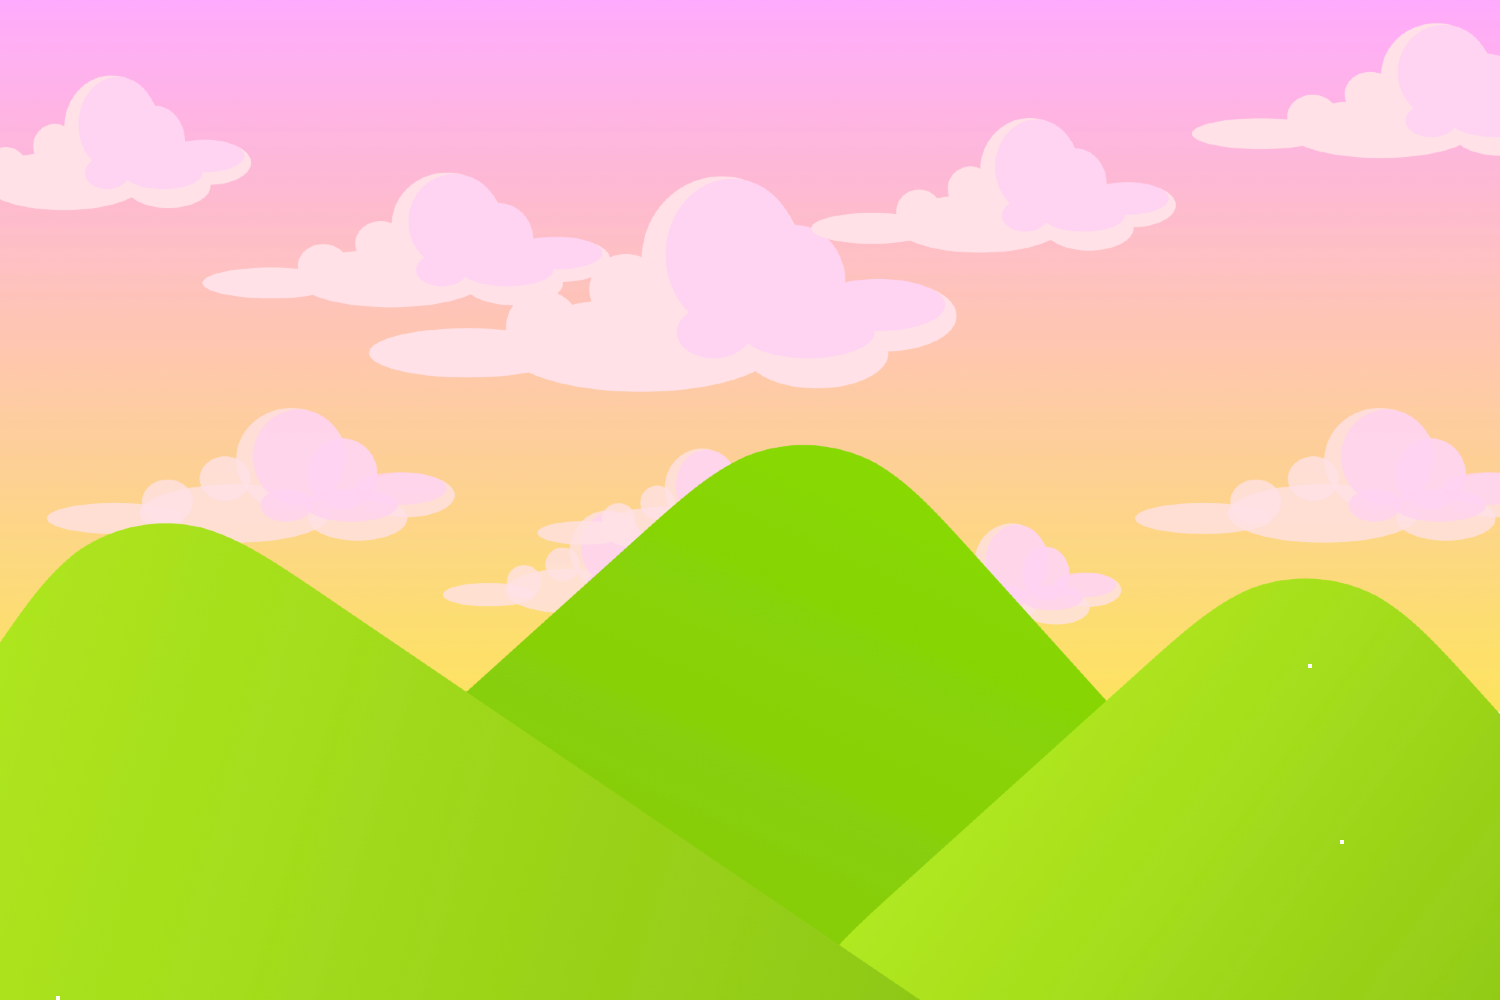 candy-crush-background-2.png